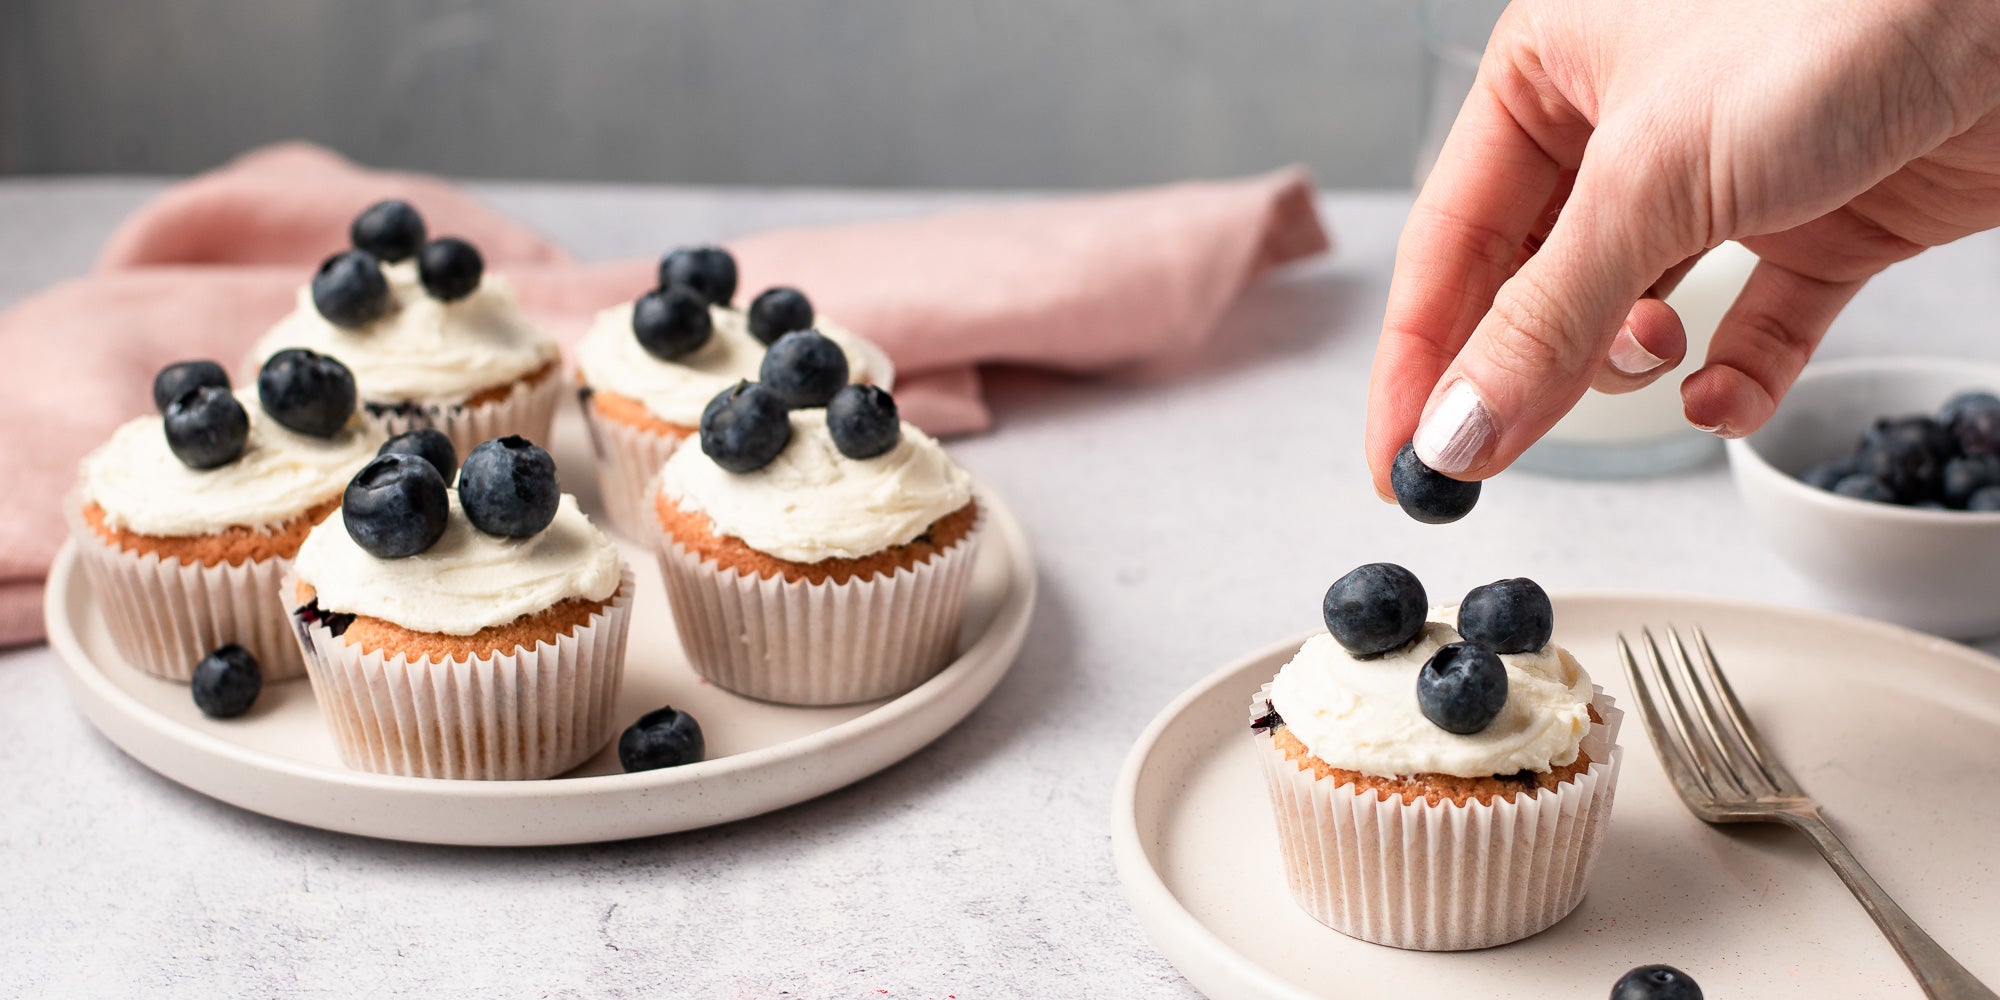 Cupcakes topped with icing and blueberries